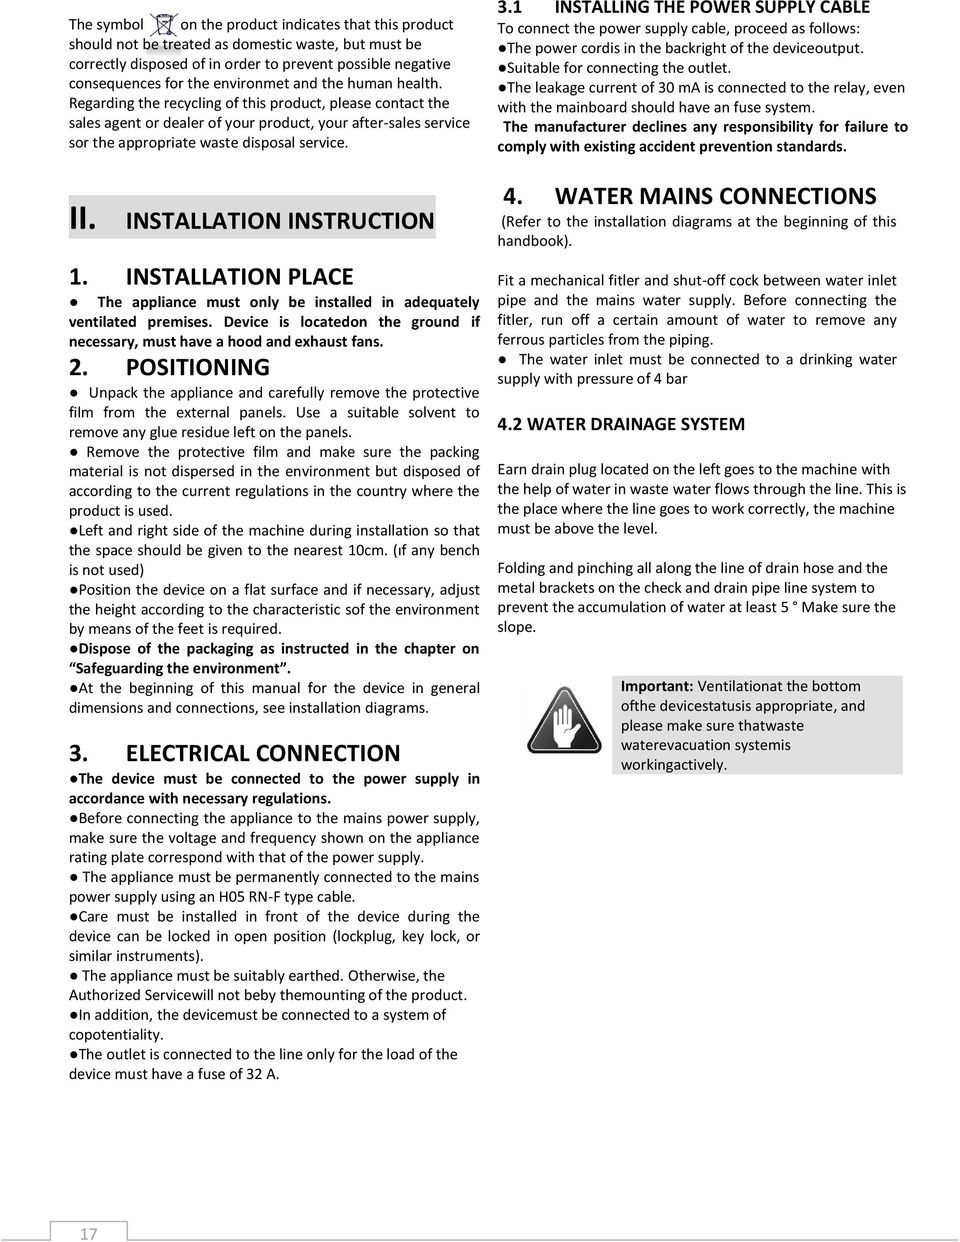 INSTALLATION INSTRUCTION 1. INSTALLATION PLACE The appliance must only be installed in adequately ventilated premises. Device is locatedon the ground if necessary, must have a hood and exhaust fans.